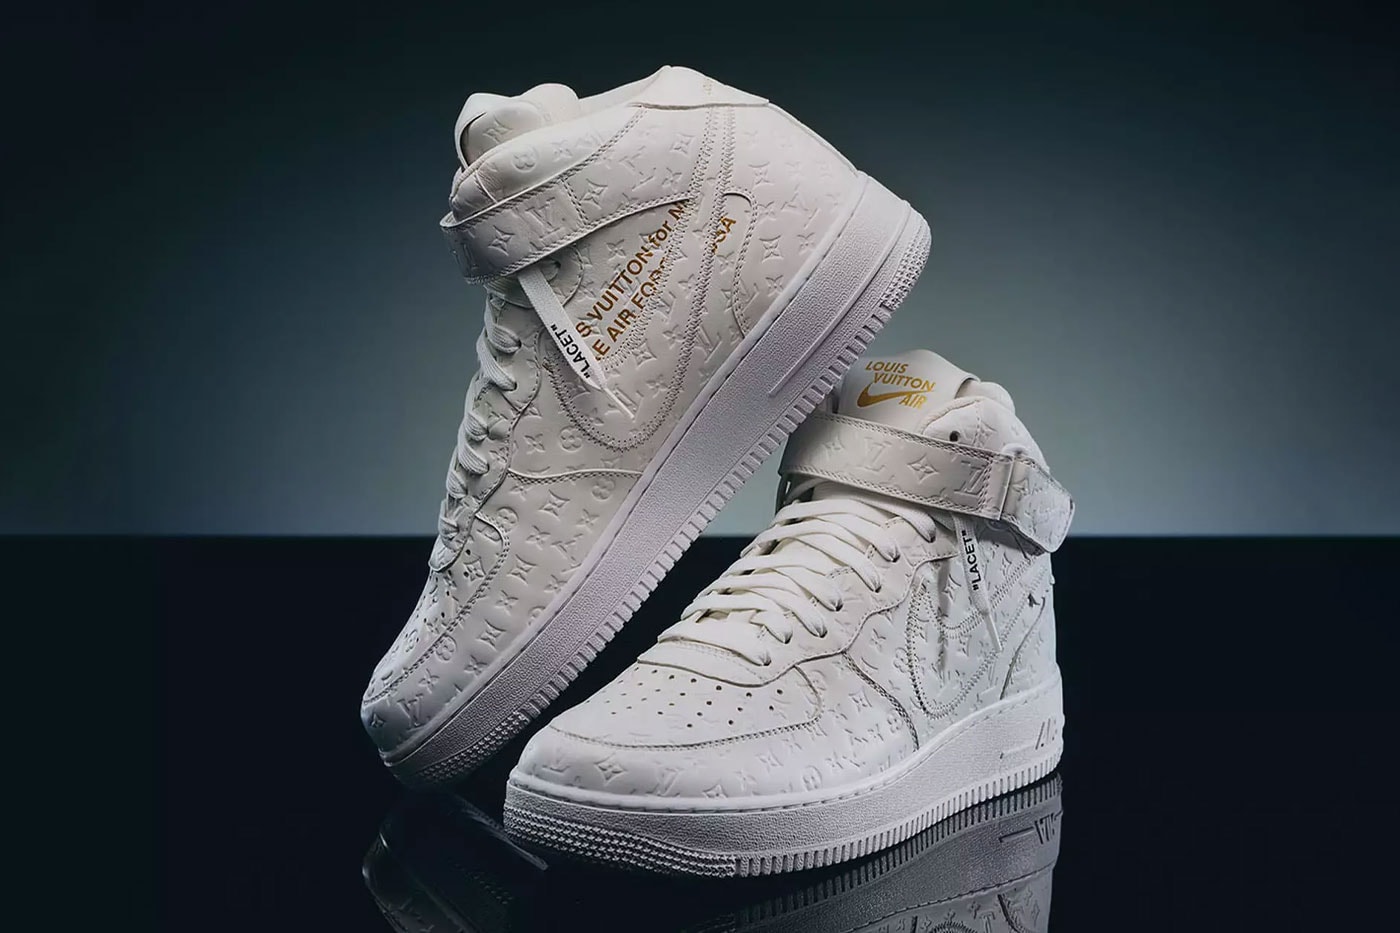 Good news: More Louis Vuitton x Nike Air Force 1s in the works